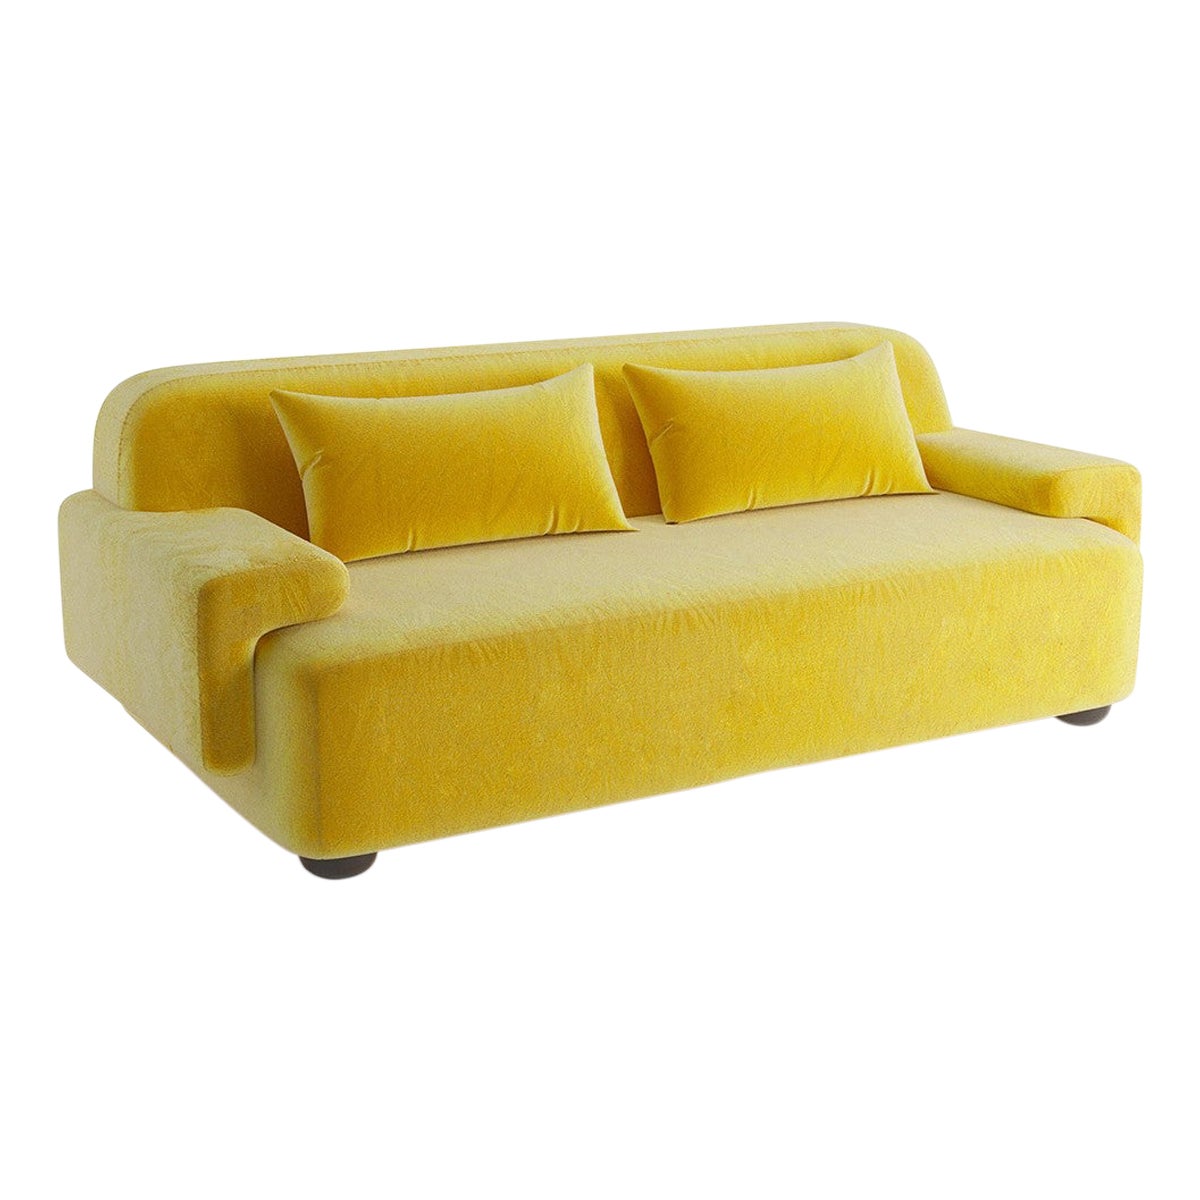 Popus Editions Lena 2.5 Seater Sofa in Yellow Verone Velvet Upholstery For Sale